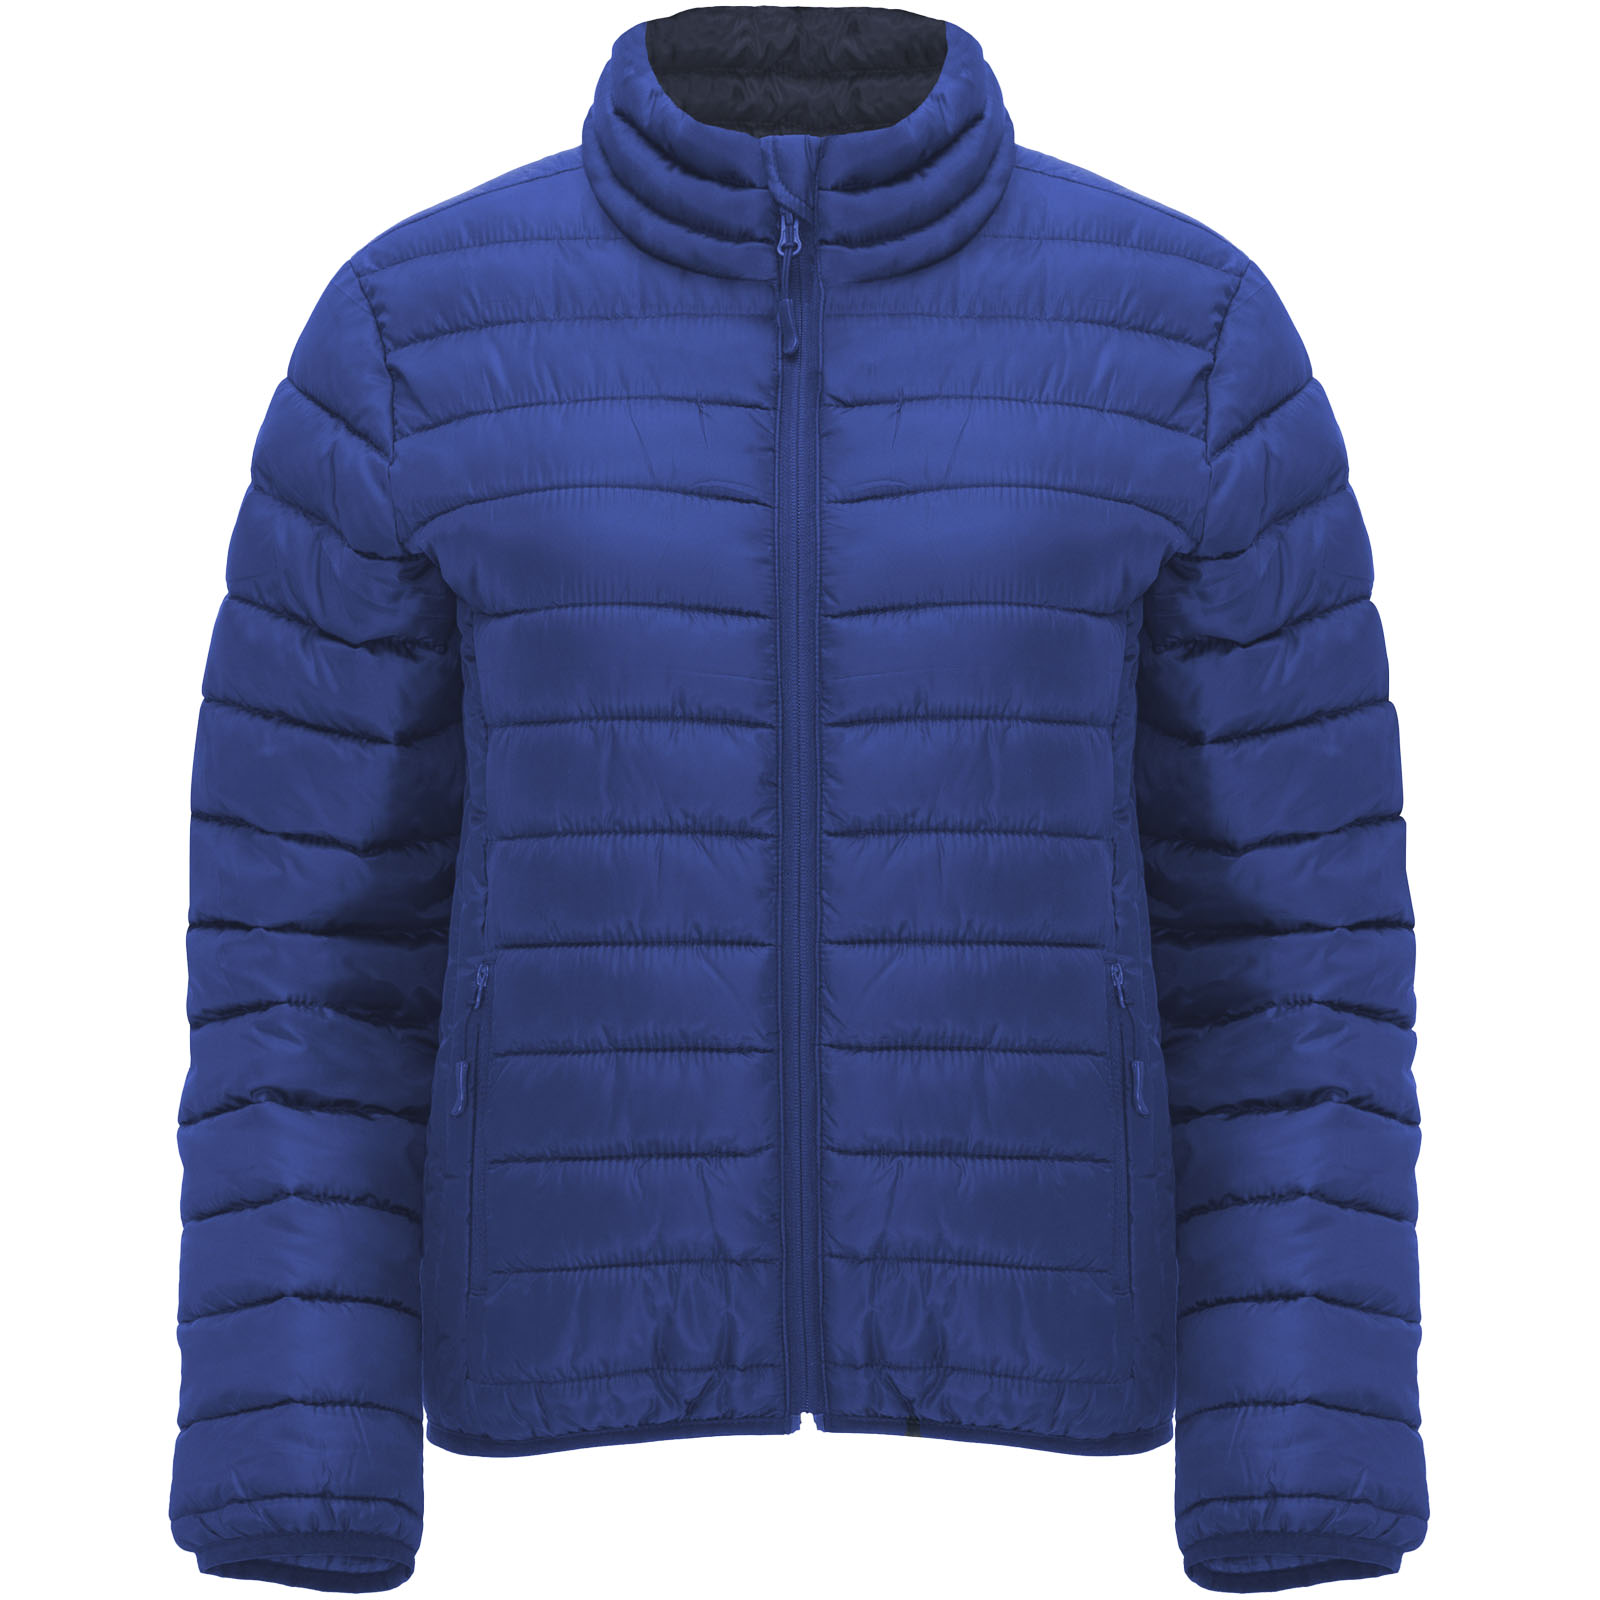 Clothing - Finland women's insulated jacket